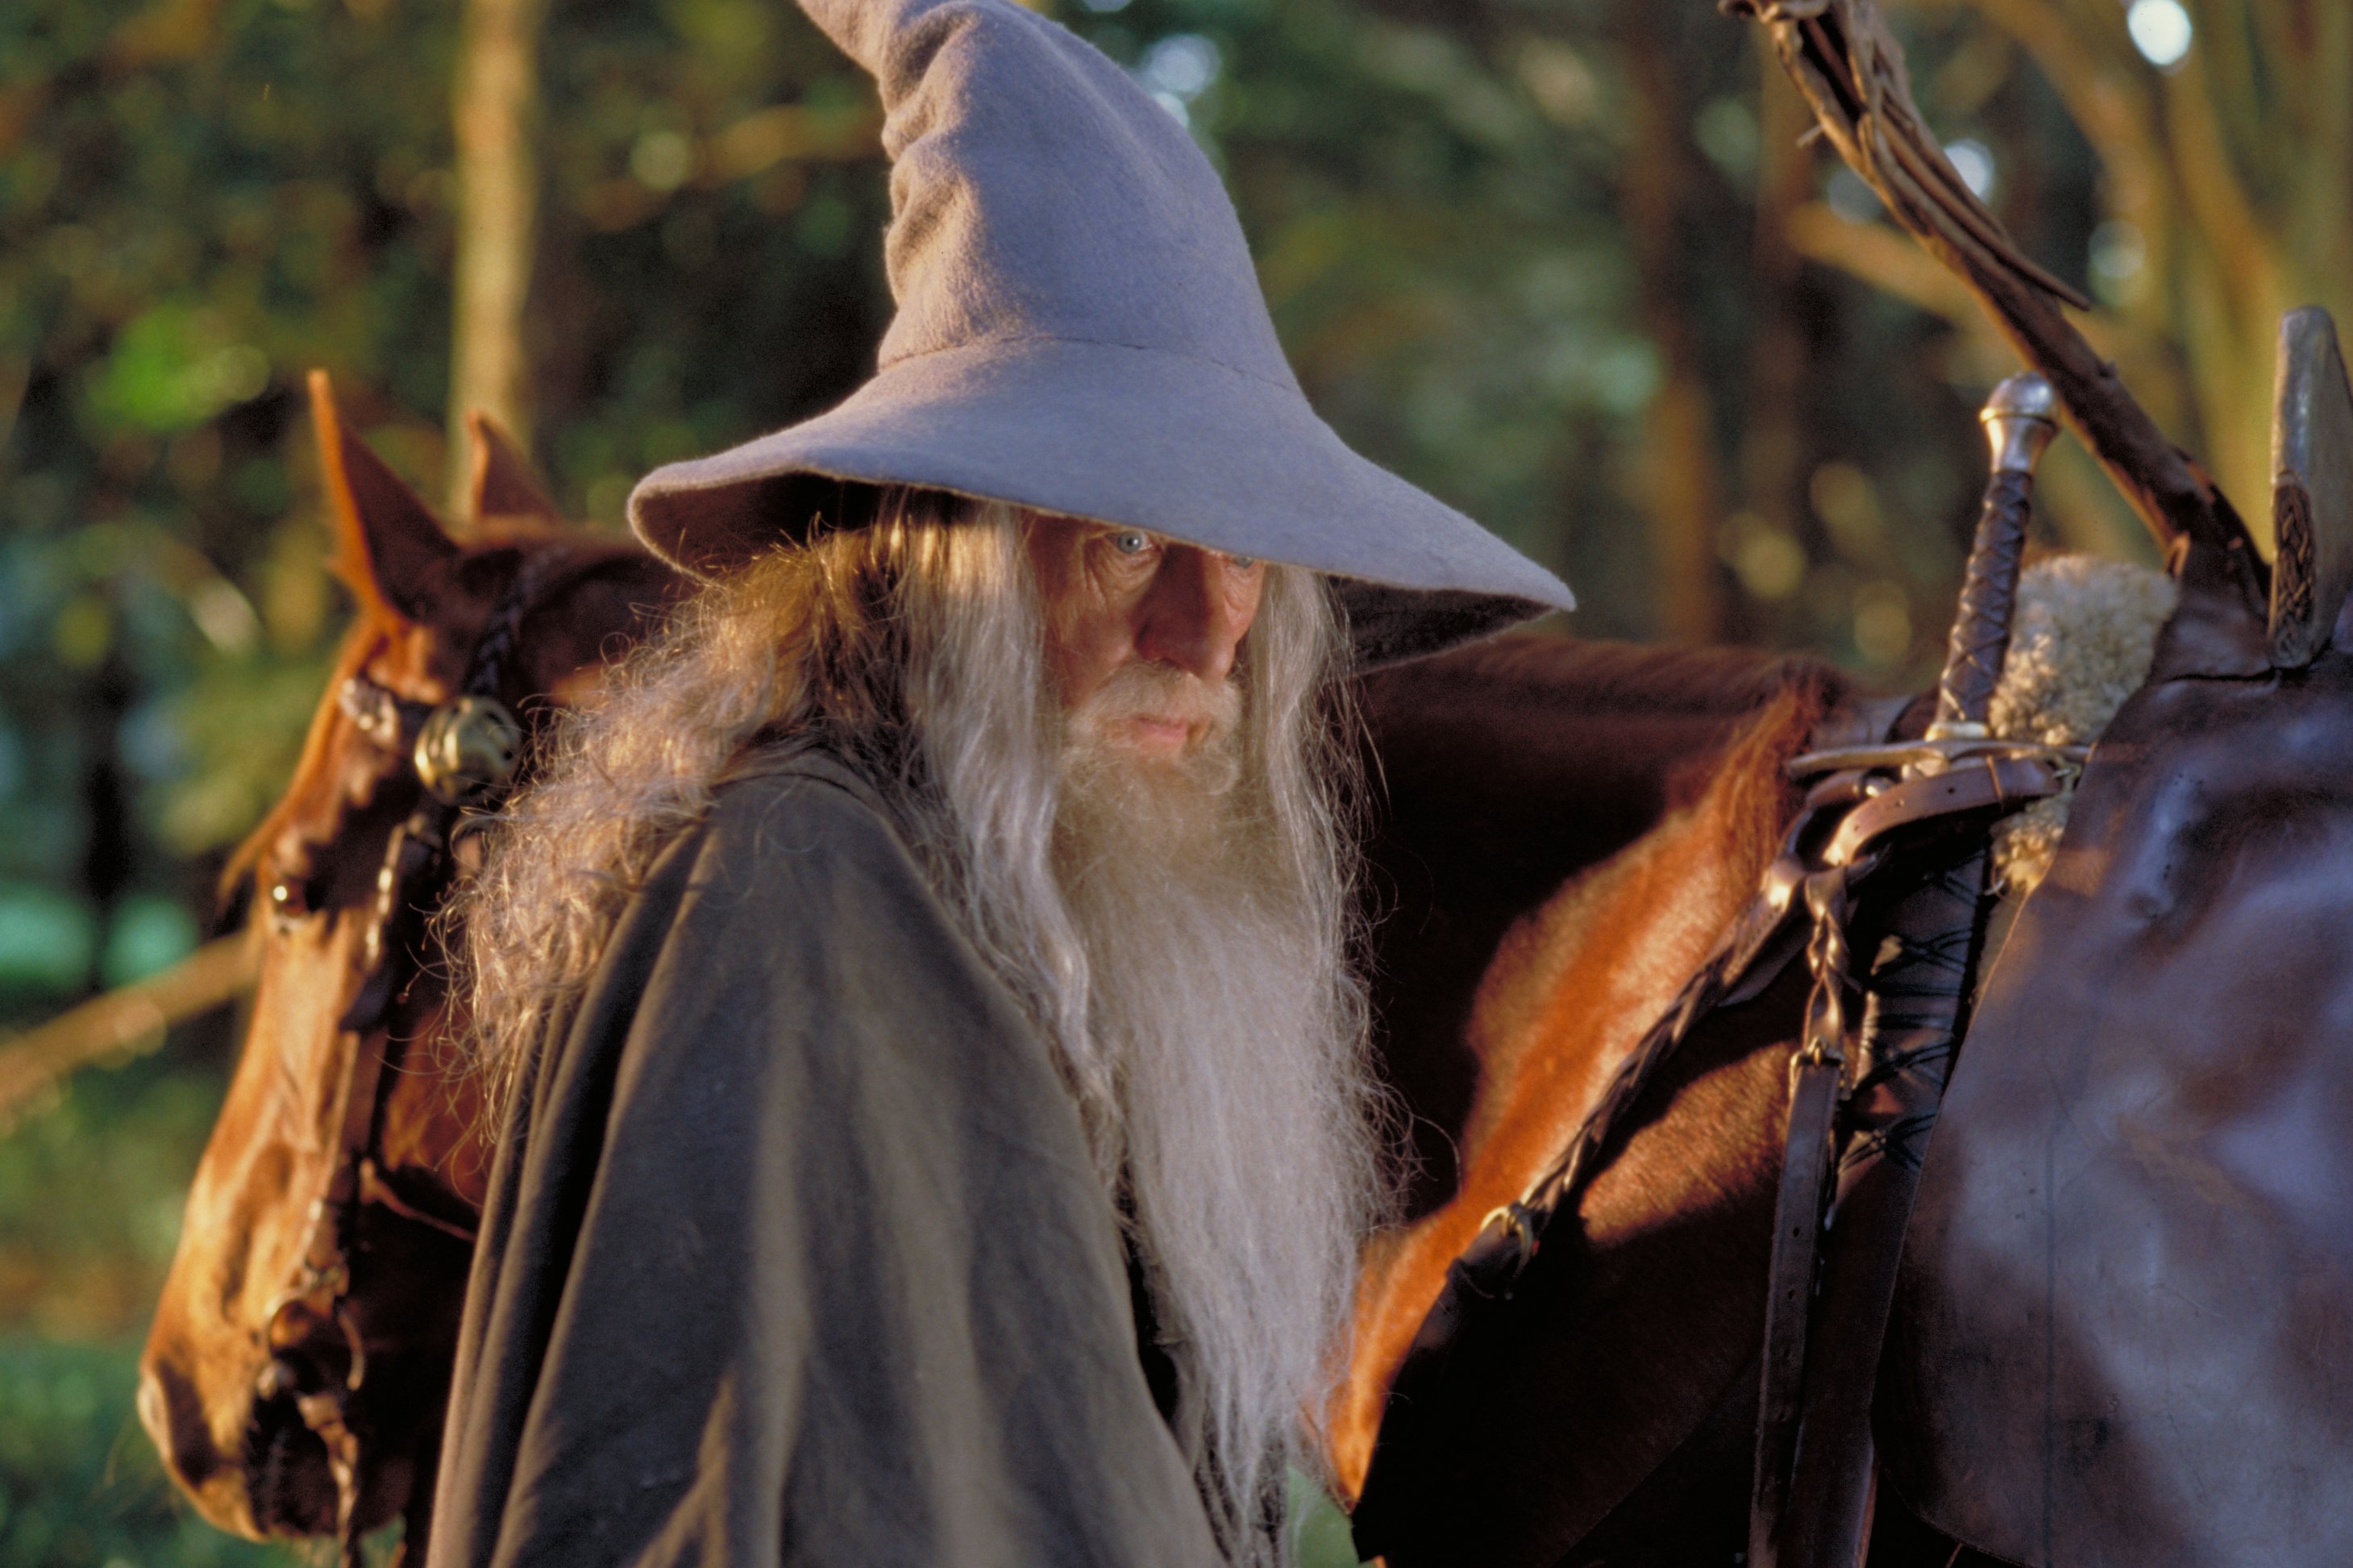 Gandalf standing next to a brown horse in The Lord of the Rings: The Fellowship of the Ring